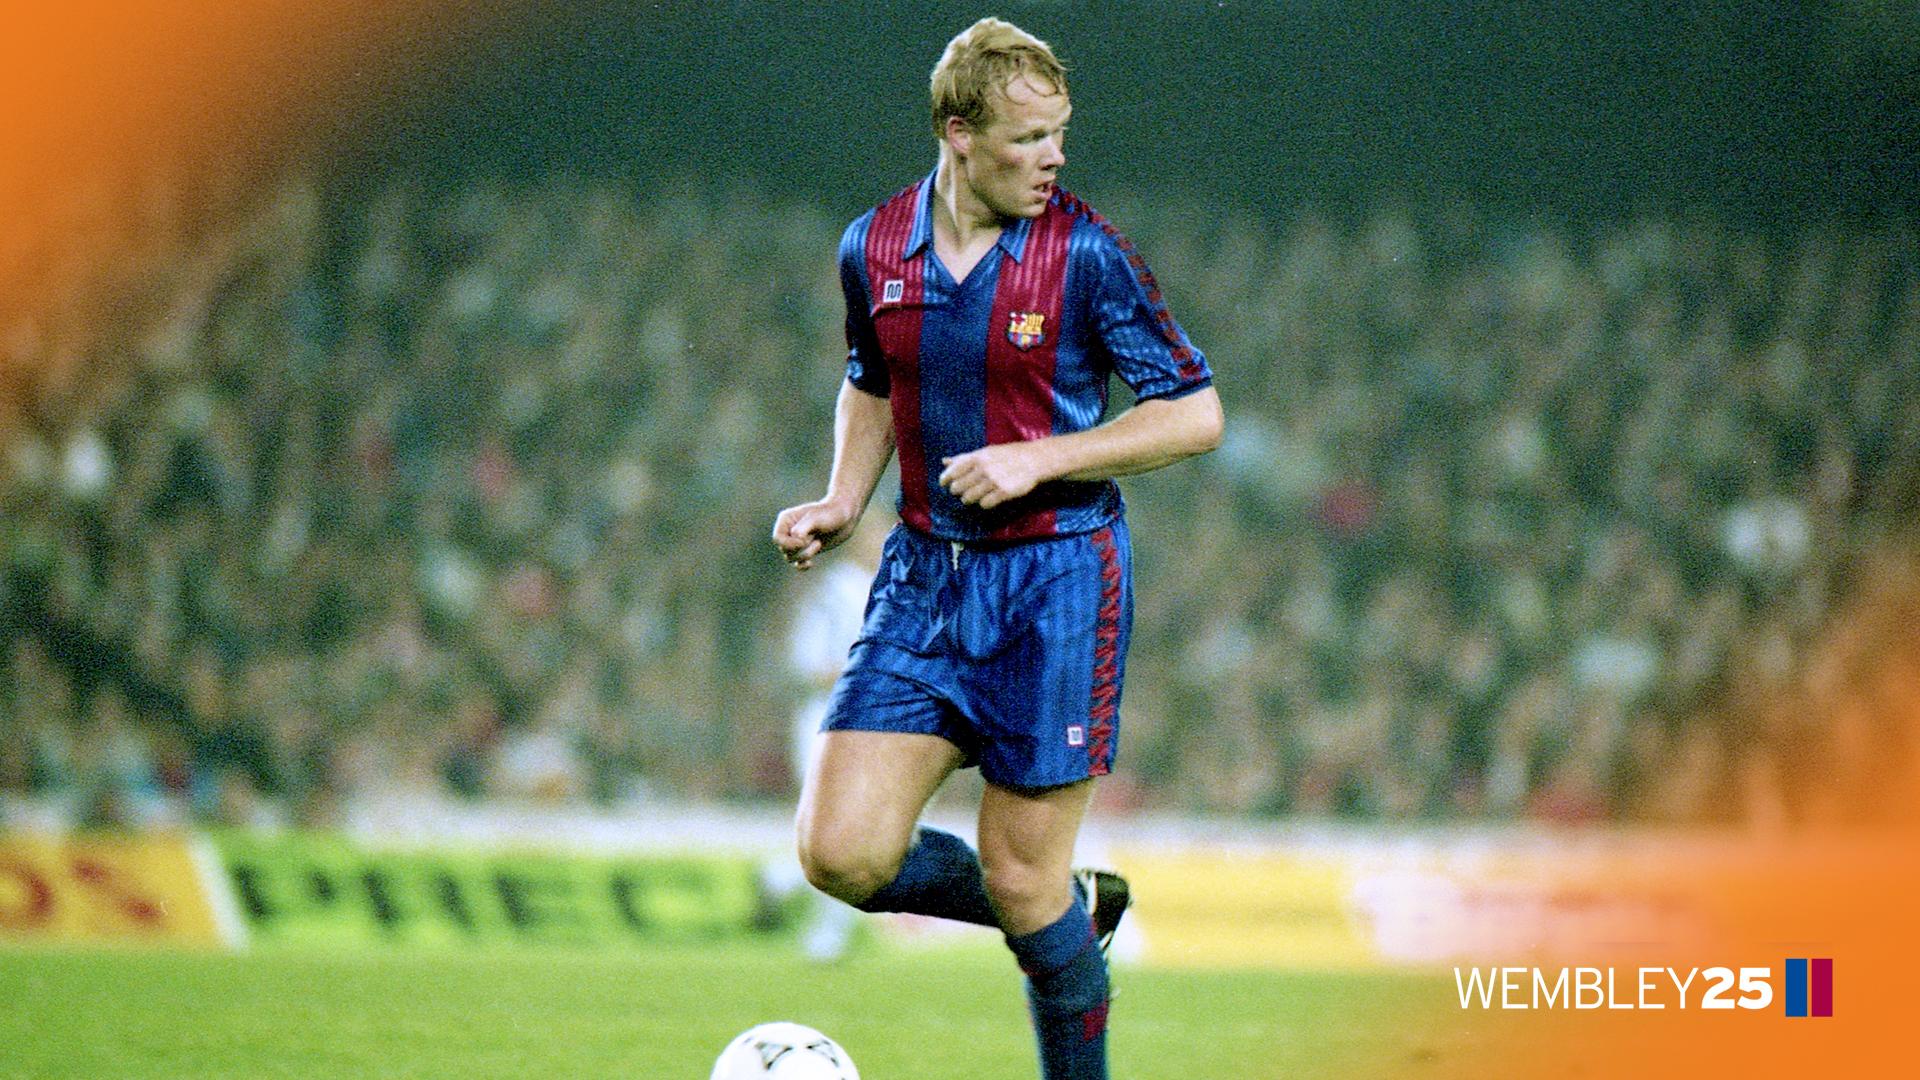 One of ours: Ronald Koeman